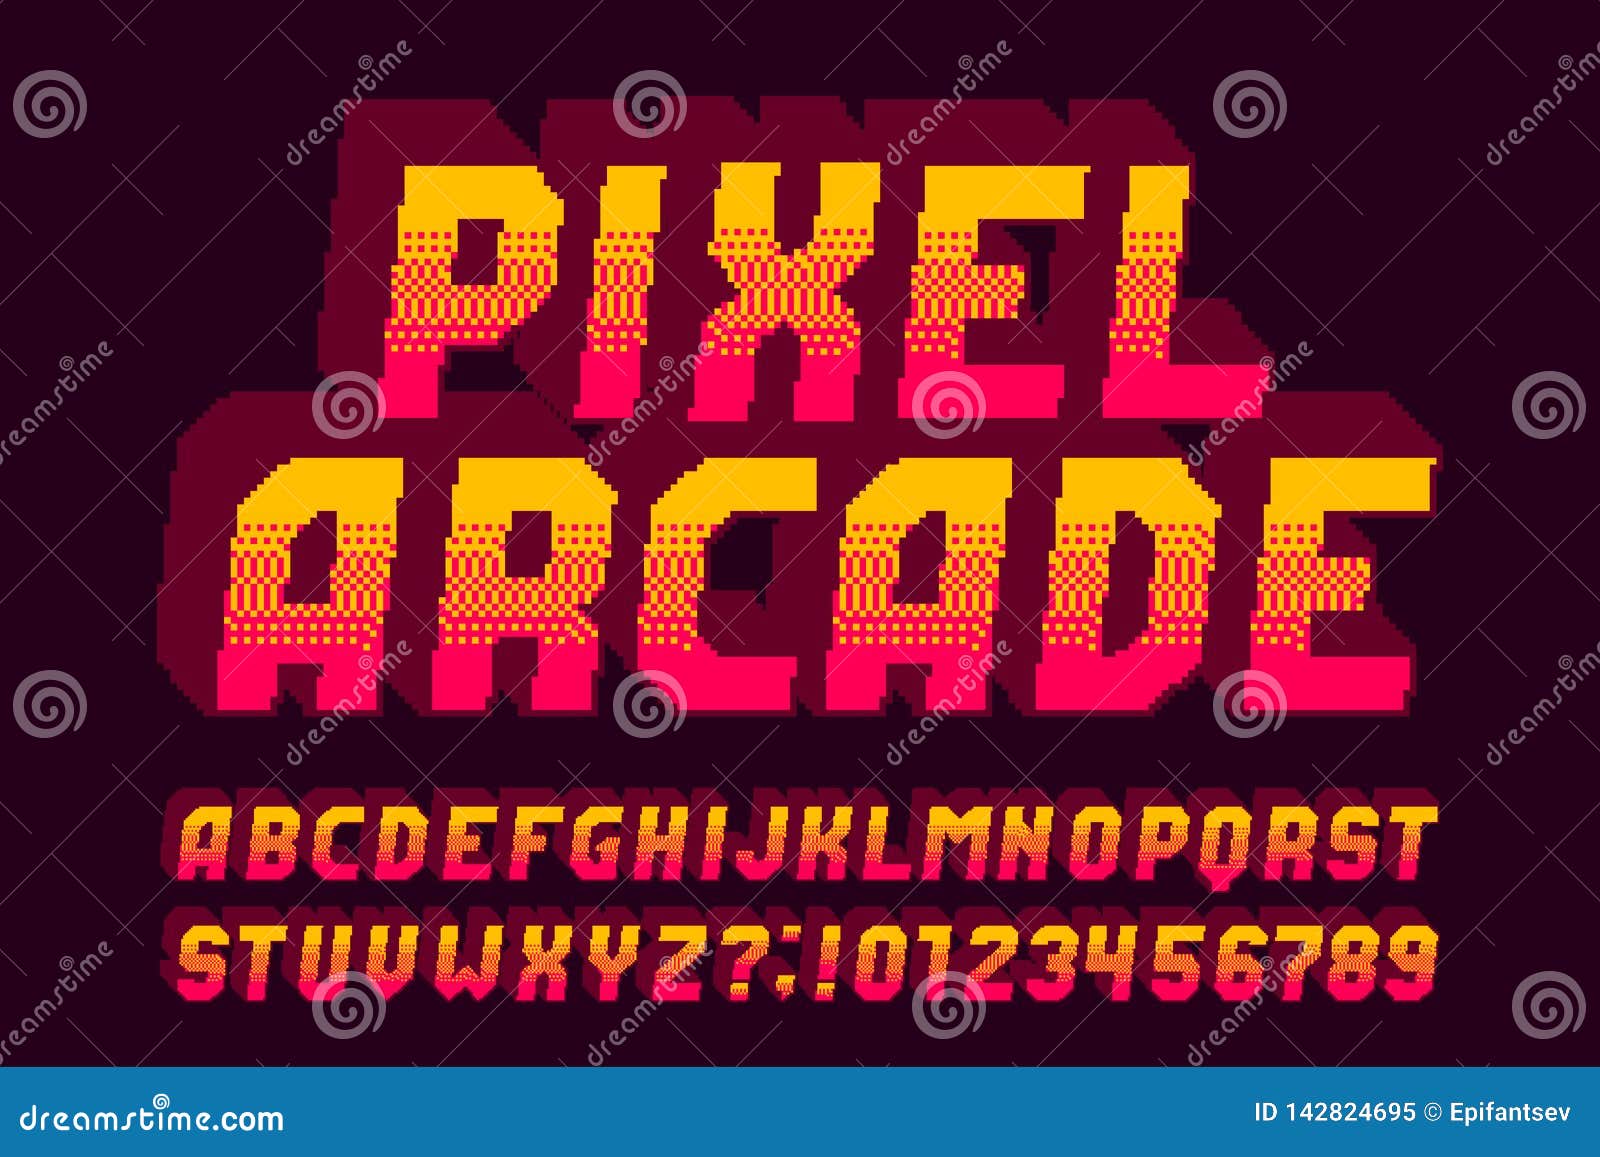 pixel arcade alphabet font. 3d effect letters, numbers and s.